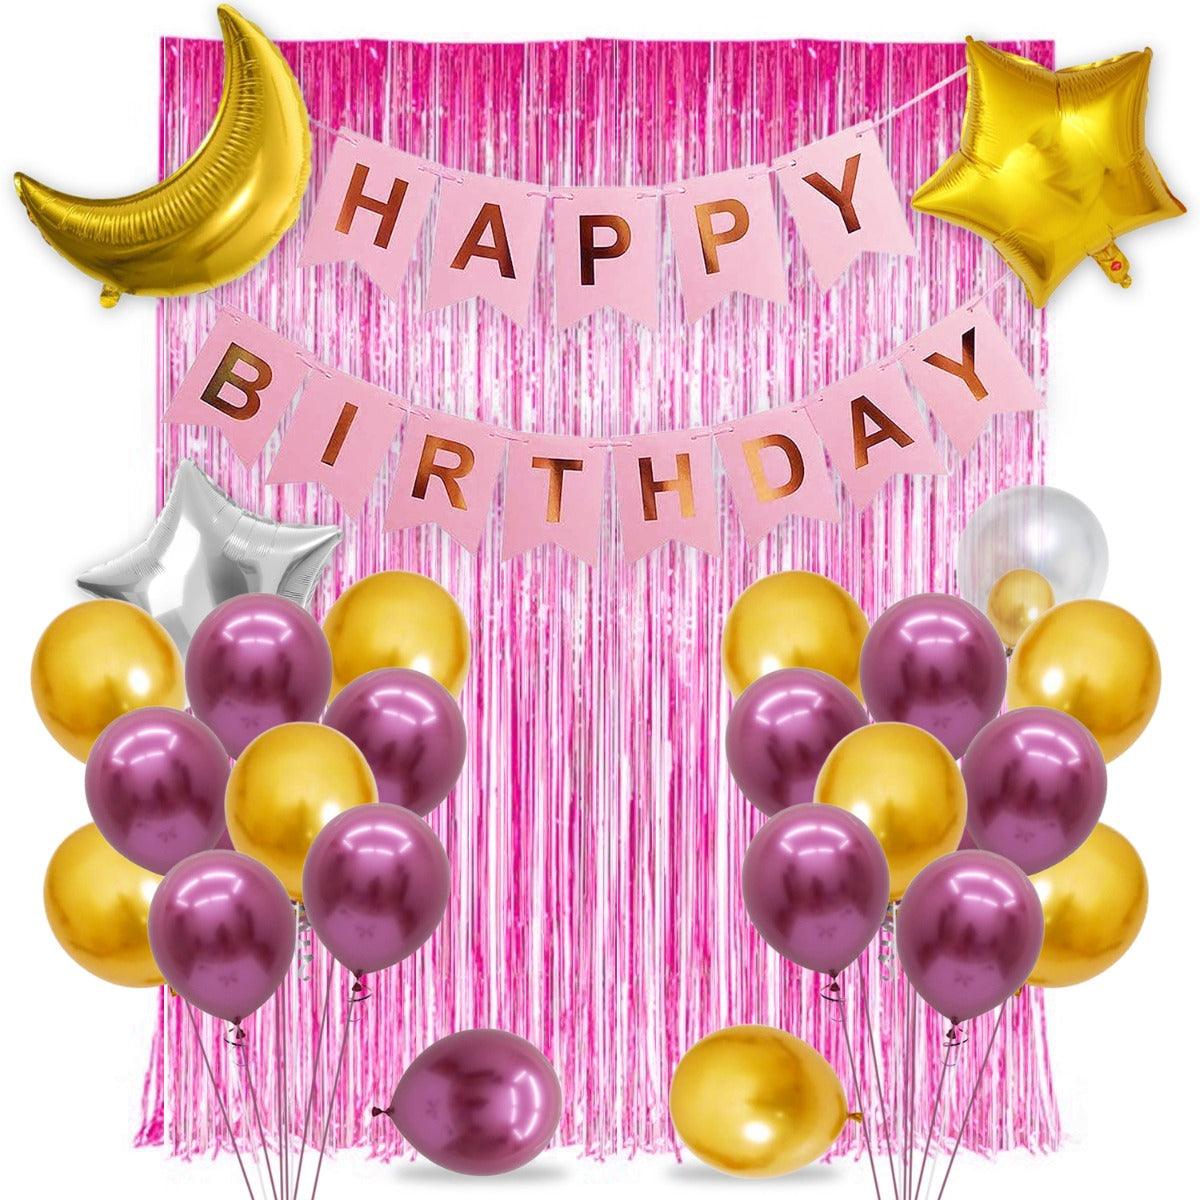 PartyCorp Happy Birthday Decoration Kit Combo 35 Pcs - Pink & Gold Chrome Balloons, Pink & Gold Happy Birthday Banner, Pink Curtain, Moon & Star Foil Balloon Bouquet